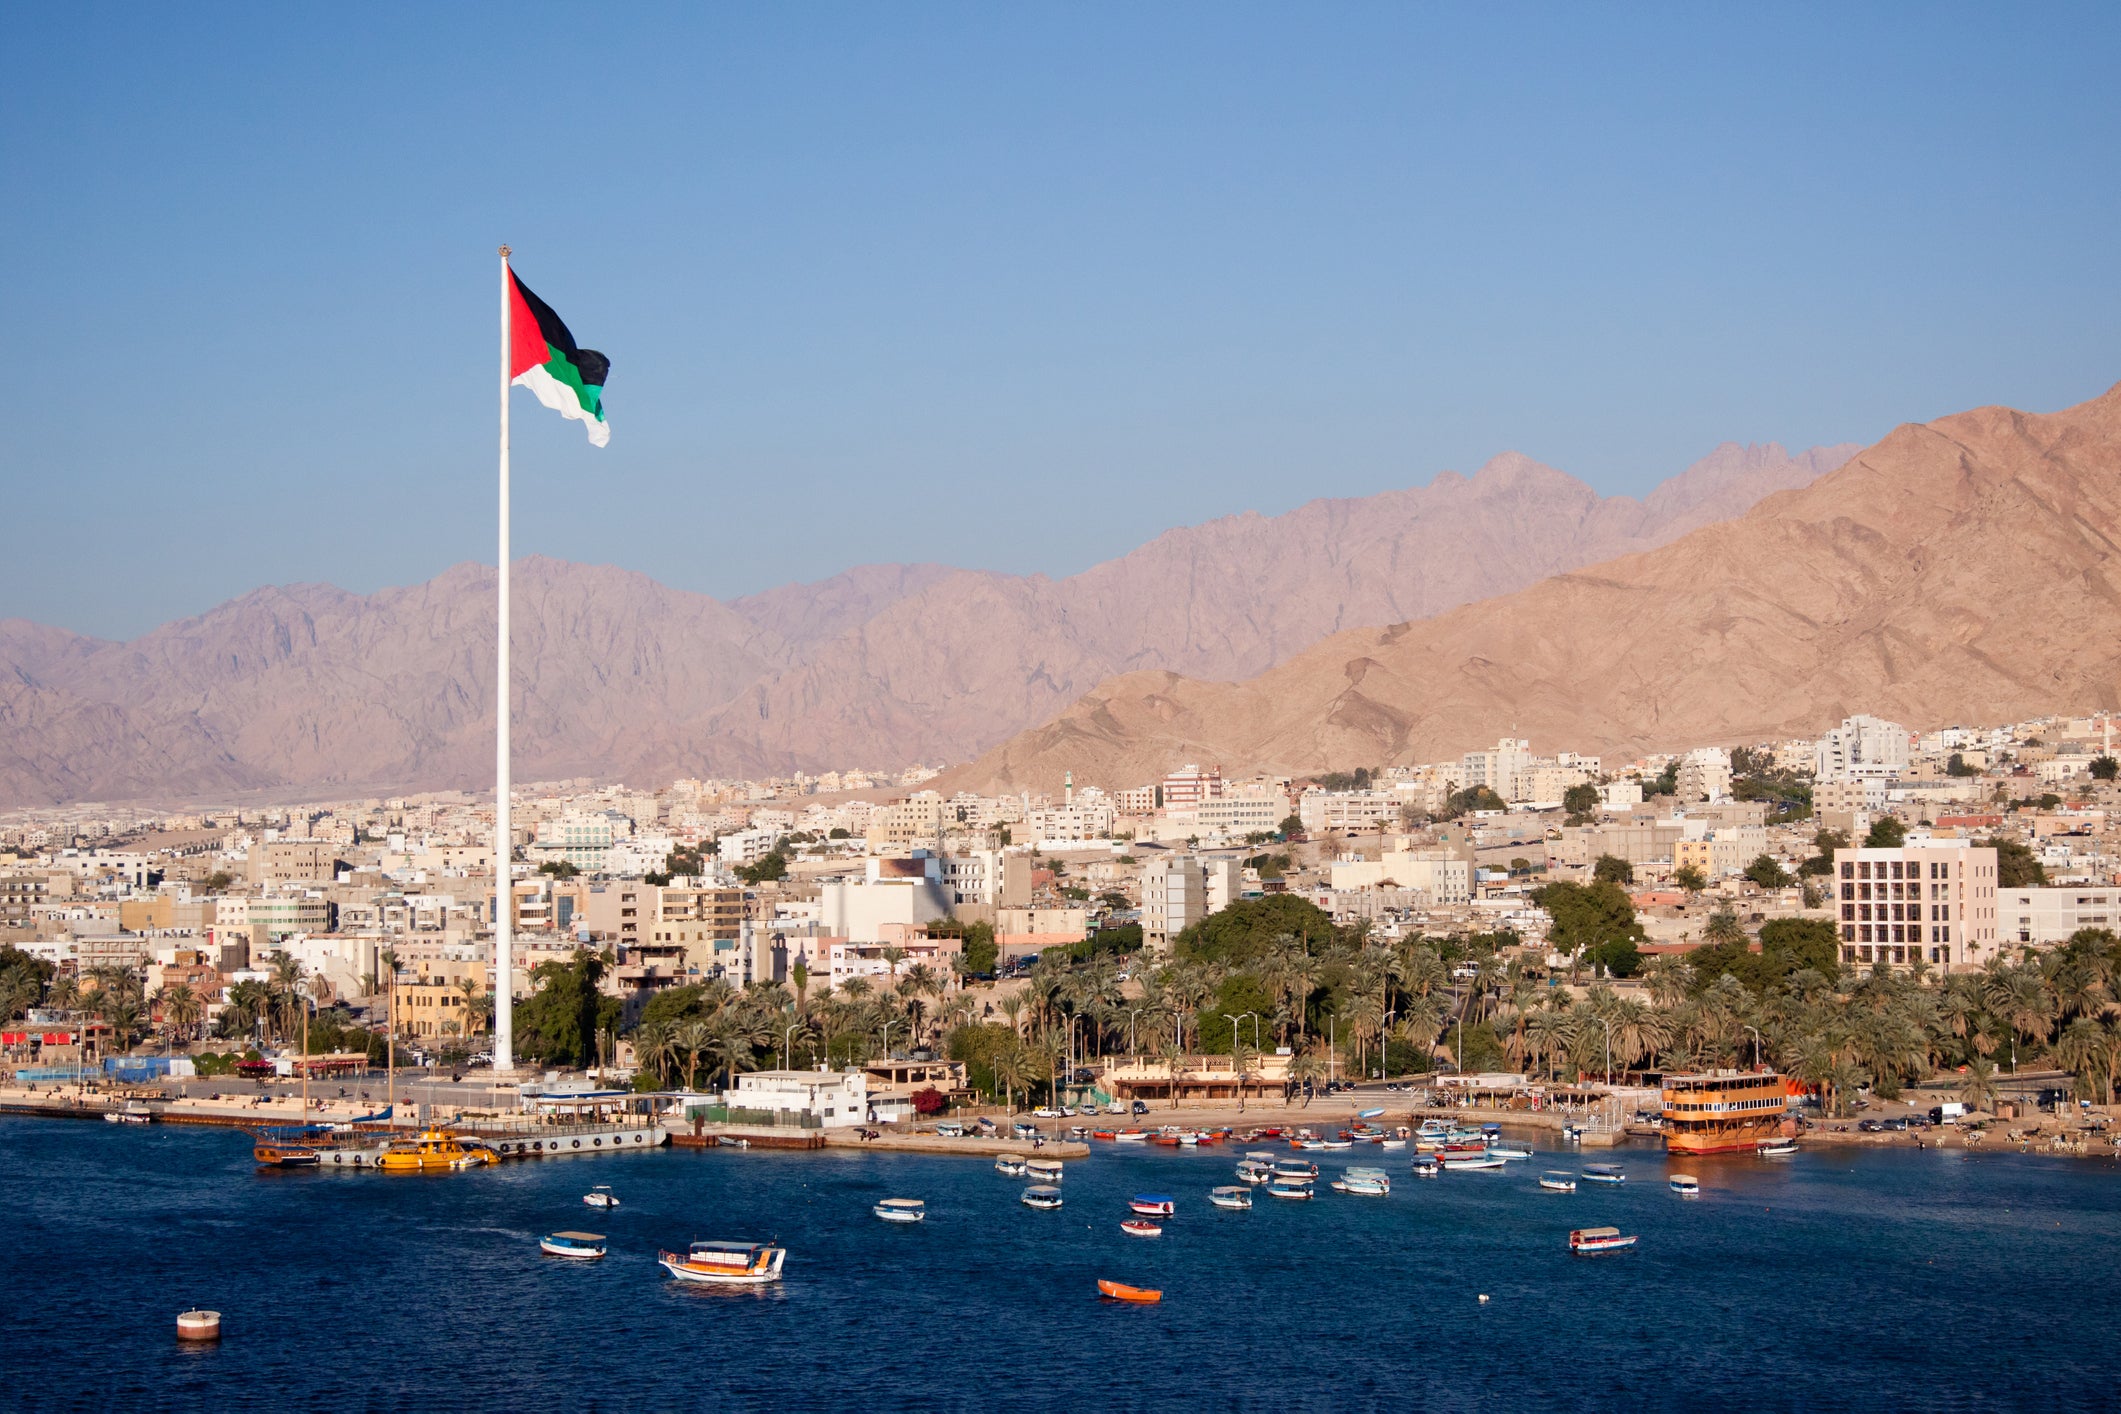 Dock up at the gateway to Jordan on family-friendly Red Sea holidays